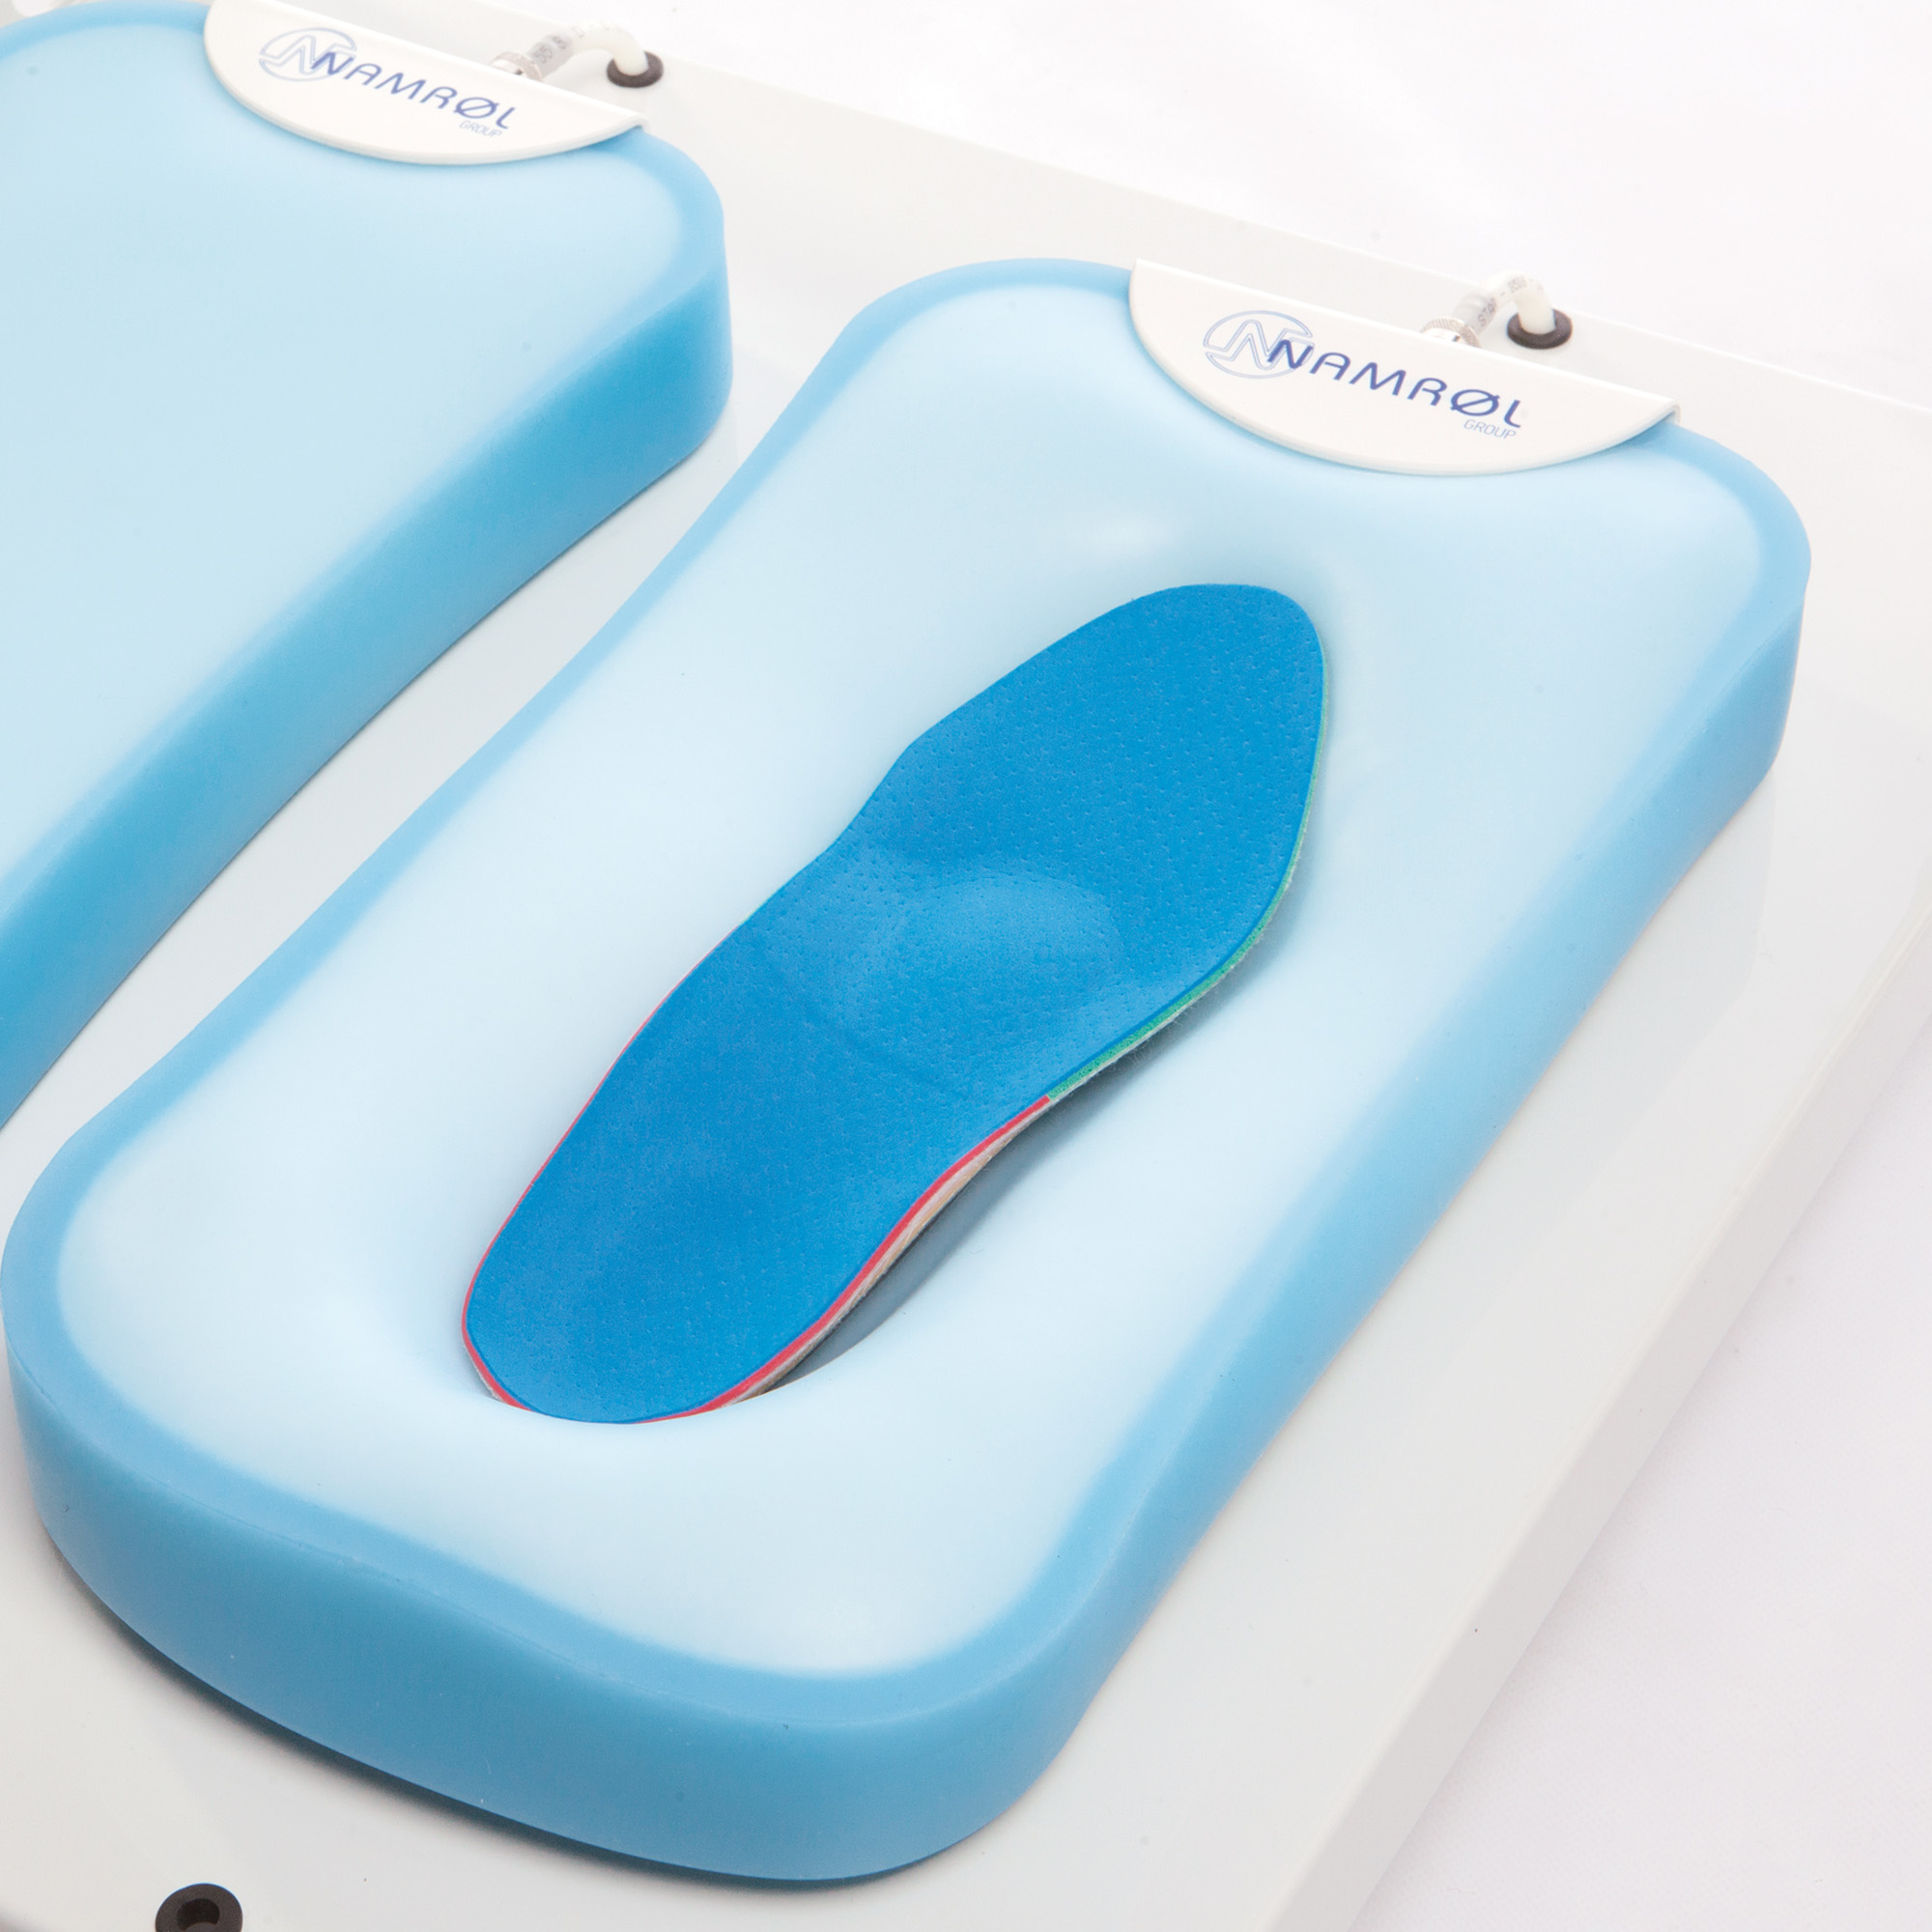 Silicone cushion with microbeads for V-Print impression taking